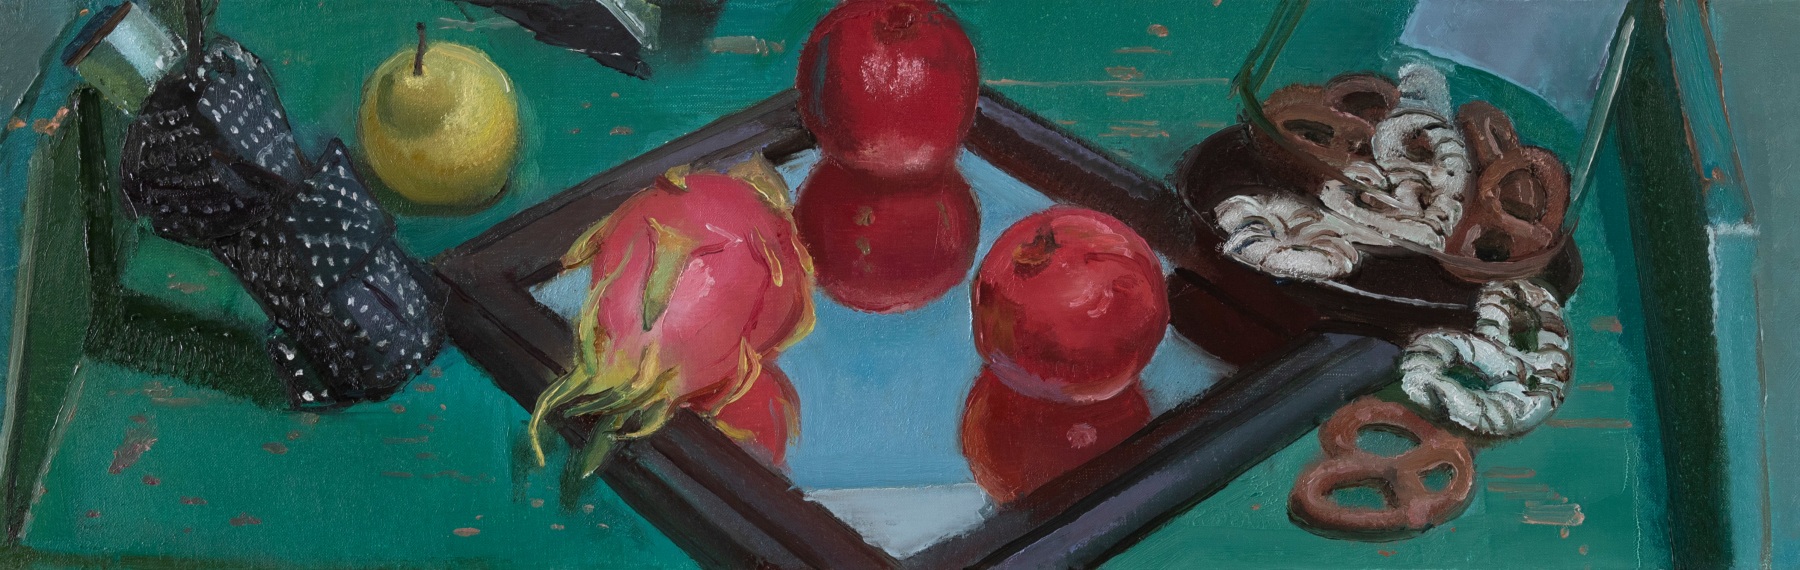 Still Life With Frosted Pretzels And Dragonfruit  12&quot; x 38&quot;  Oil On Linen  Shop